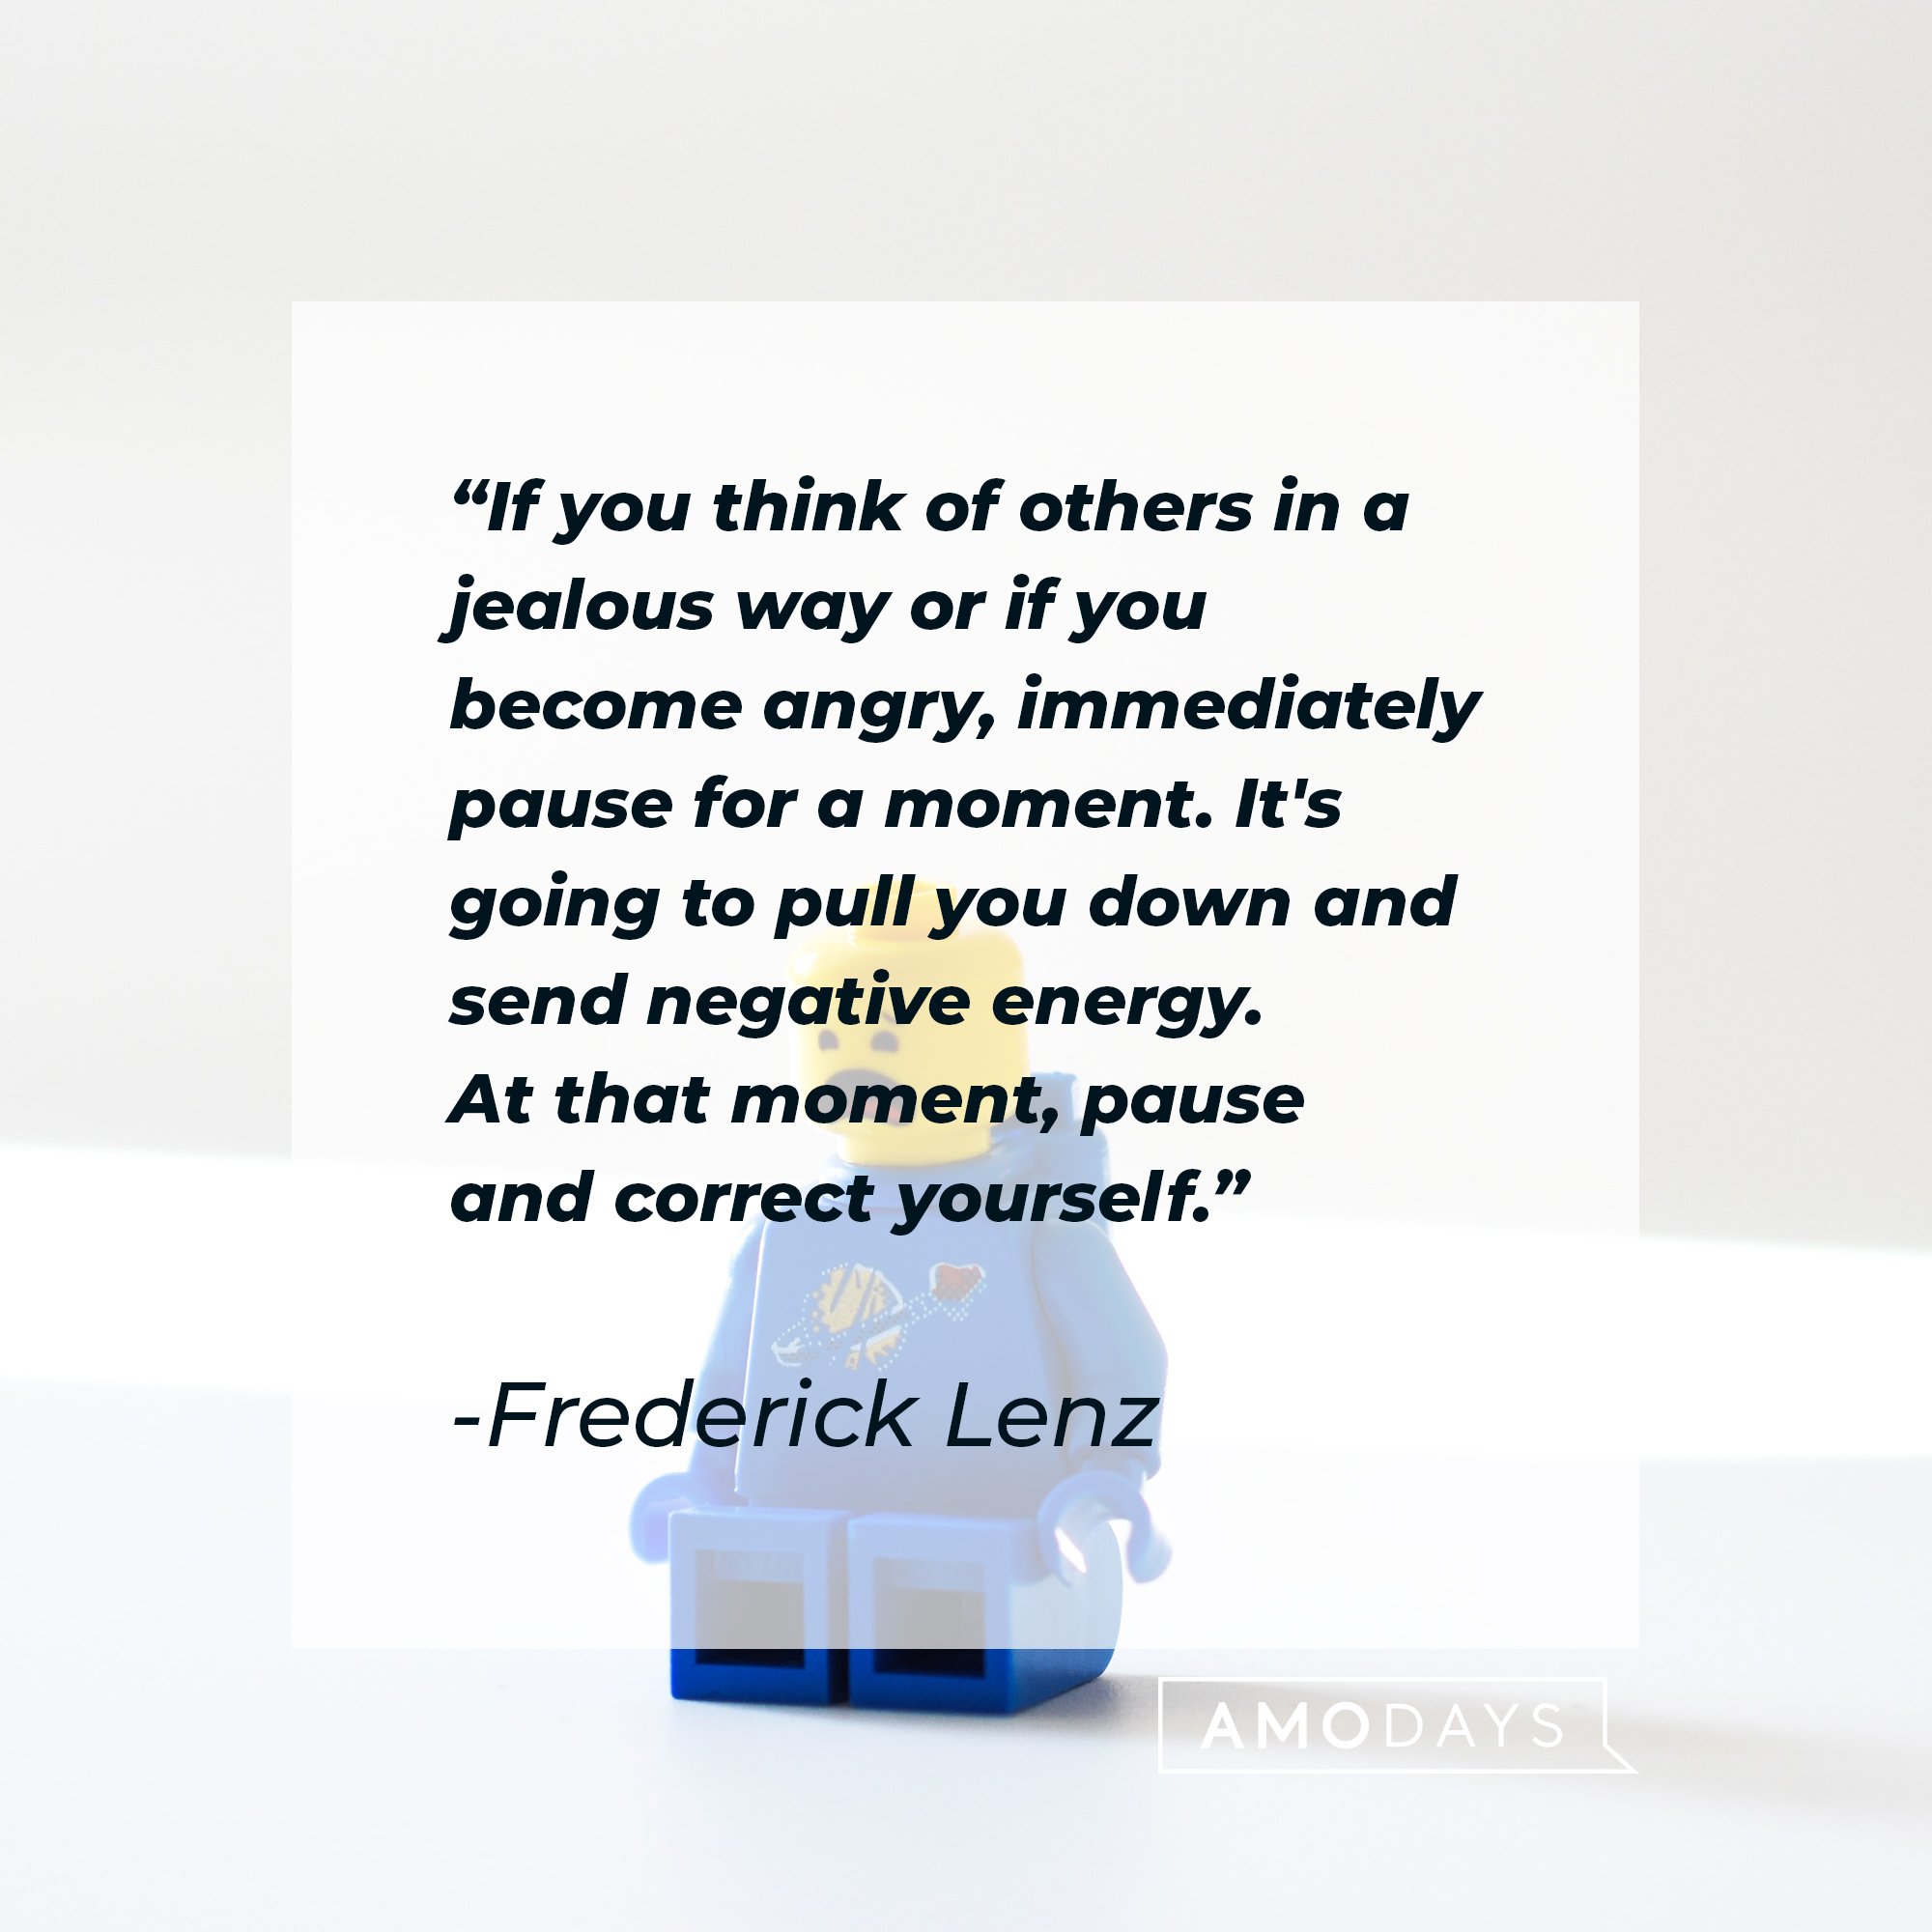 Frederick Lenz’ quote: If you think of others in a jealous way or if you become angry, immediately pause for a moment. It's going to pull you down and send negative energy. At that moment, pause and correct yourself.” | Image: AmoDays